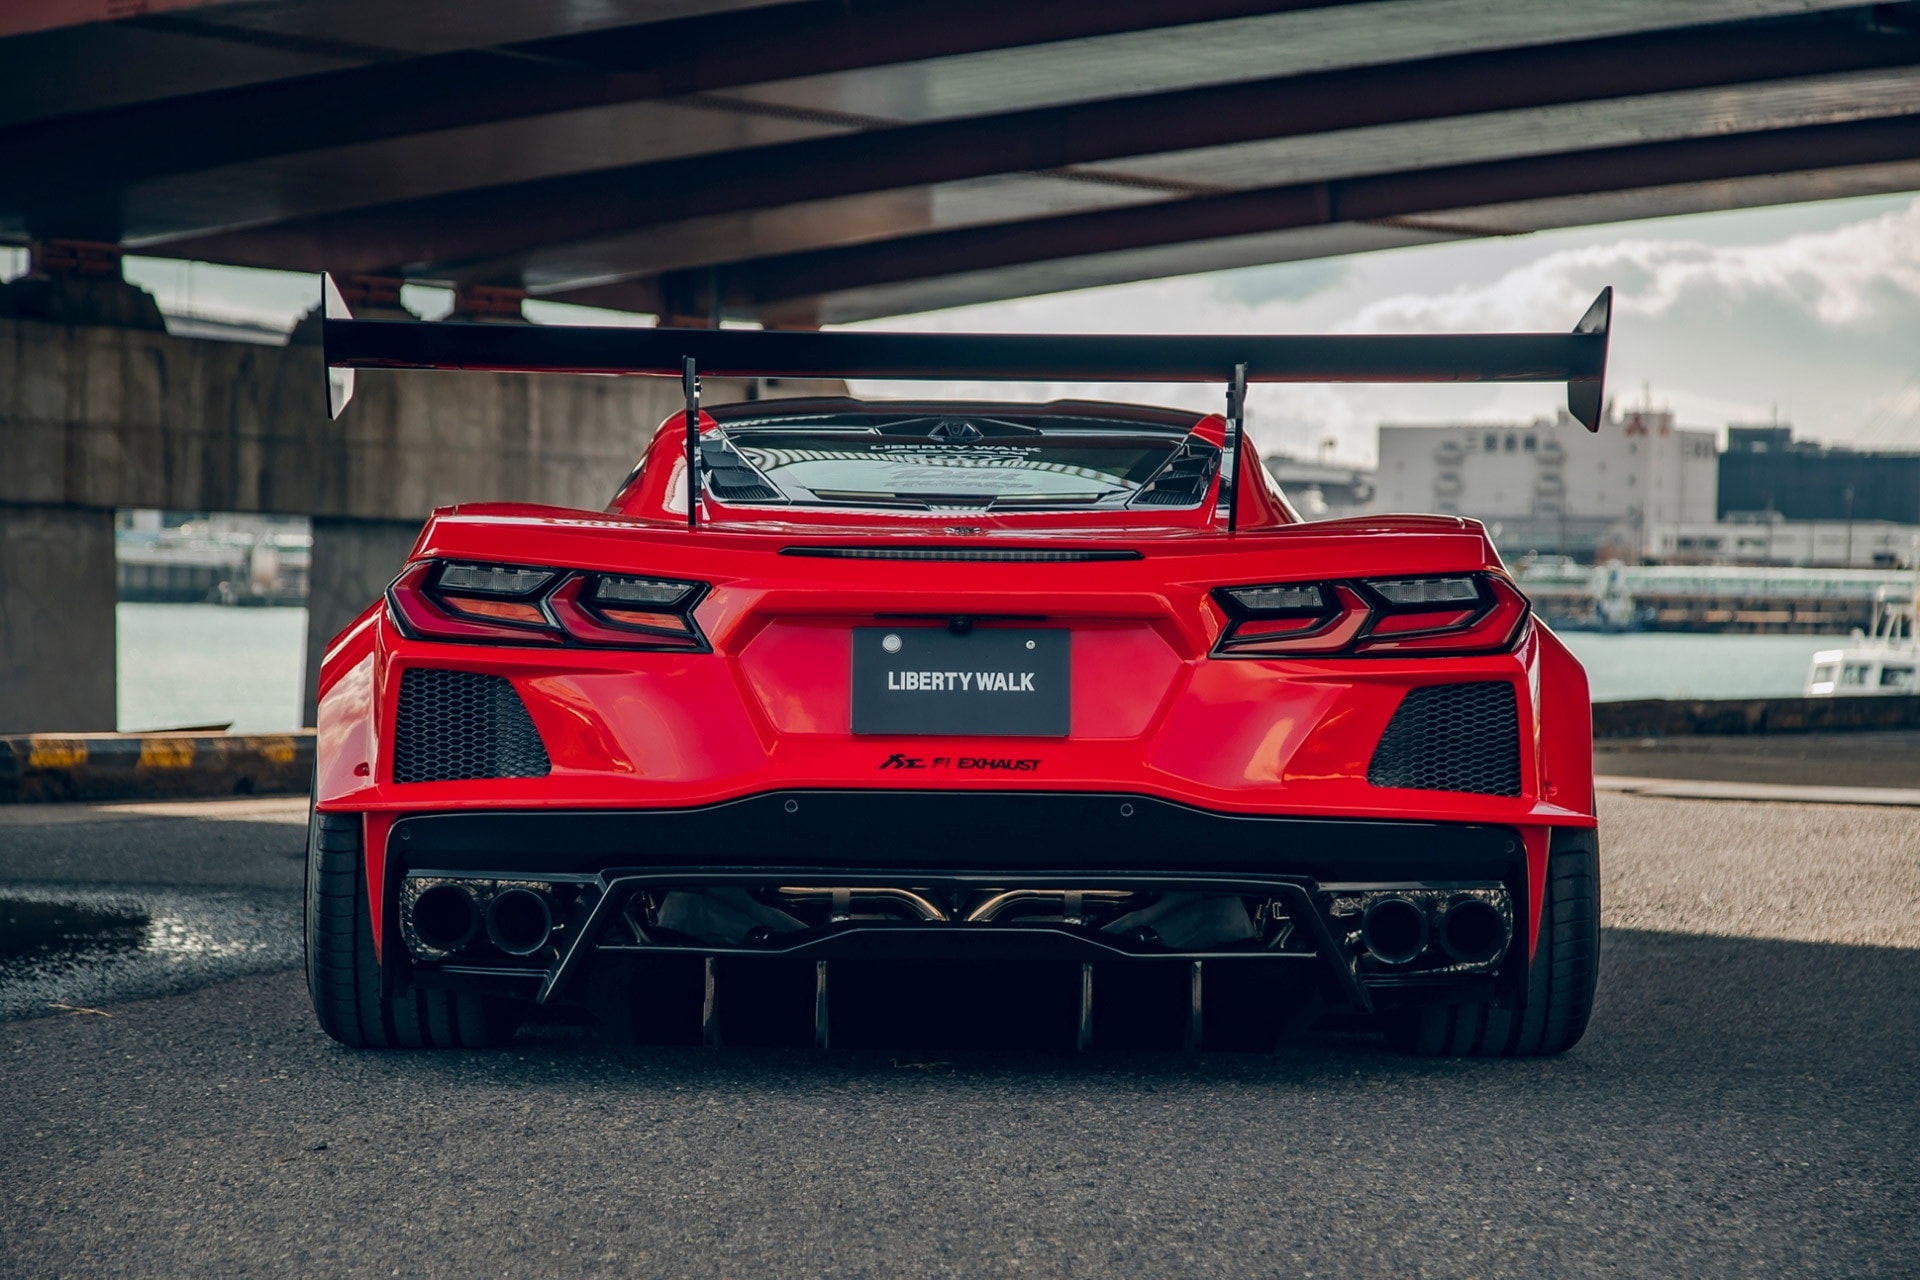 Chevrolet Corvette C8 Iconic Supercar Redefined and Tuned